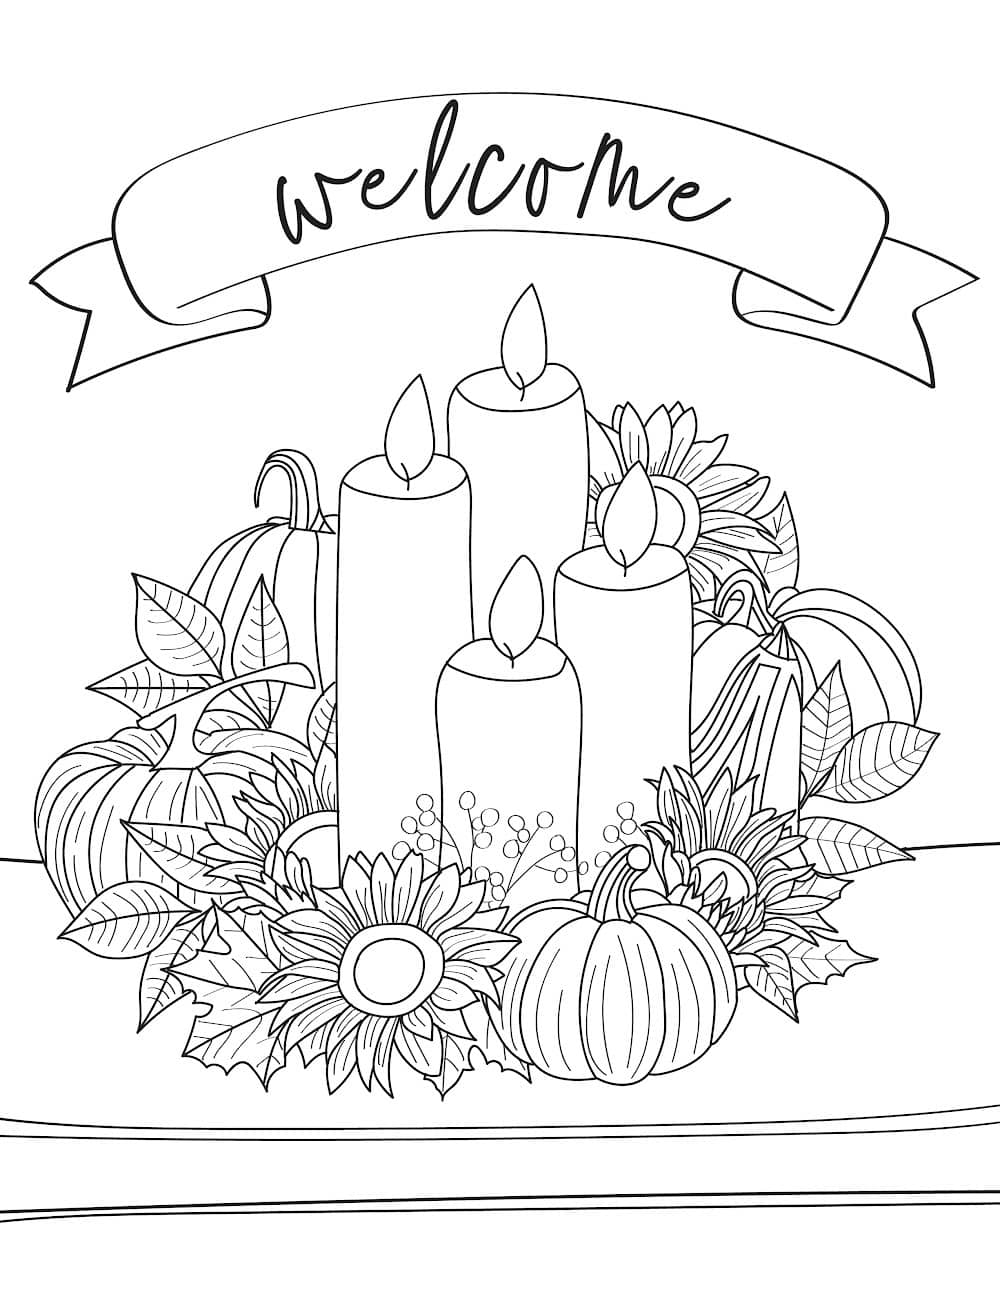 Printable easy fall coloring pages for adults